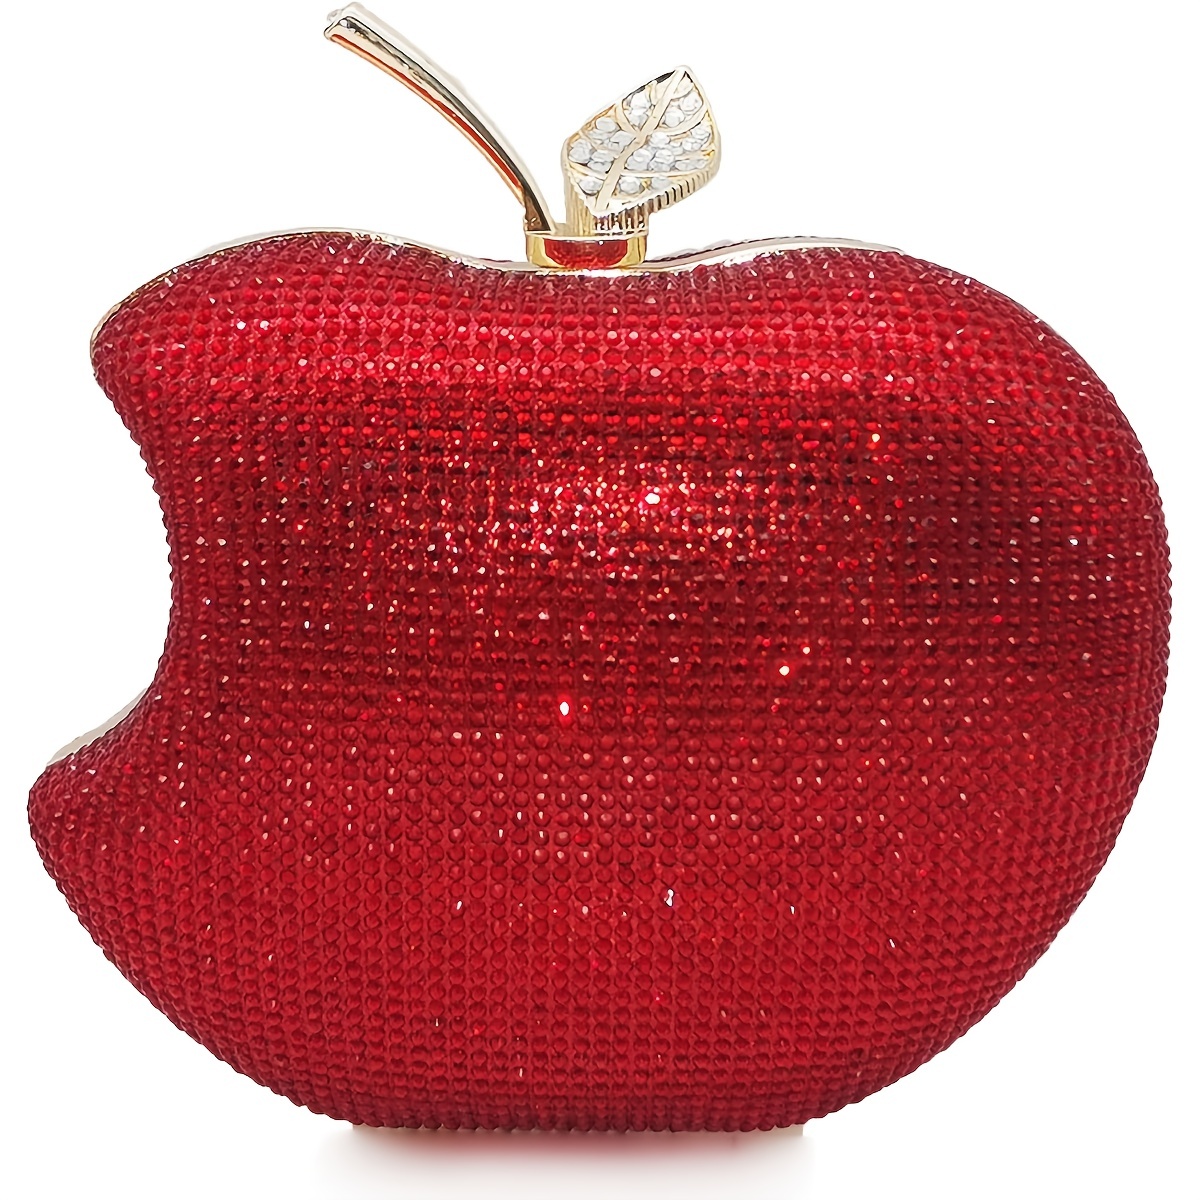 Amazing Deals on Red Apple Evening Bag